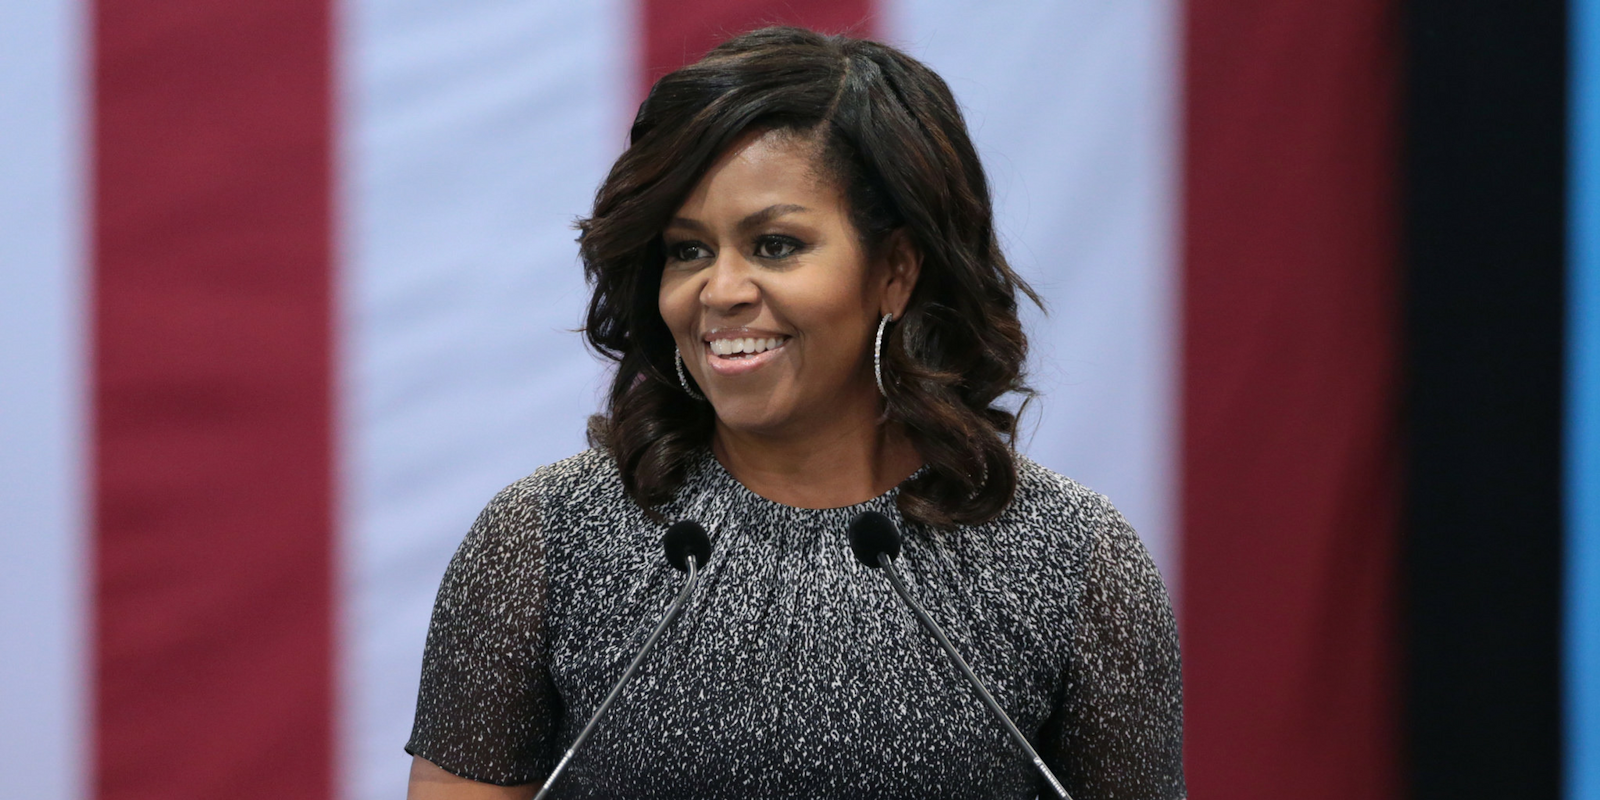 Michelle Obama stumping for Hillary Clinton in 2016